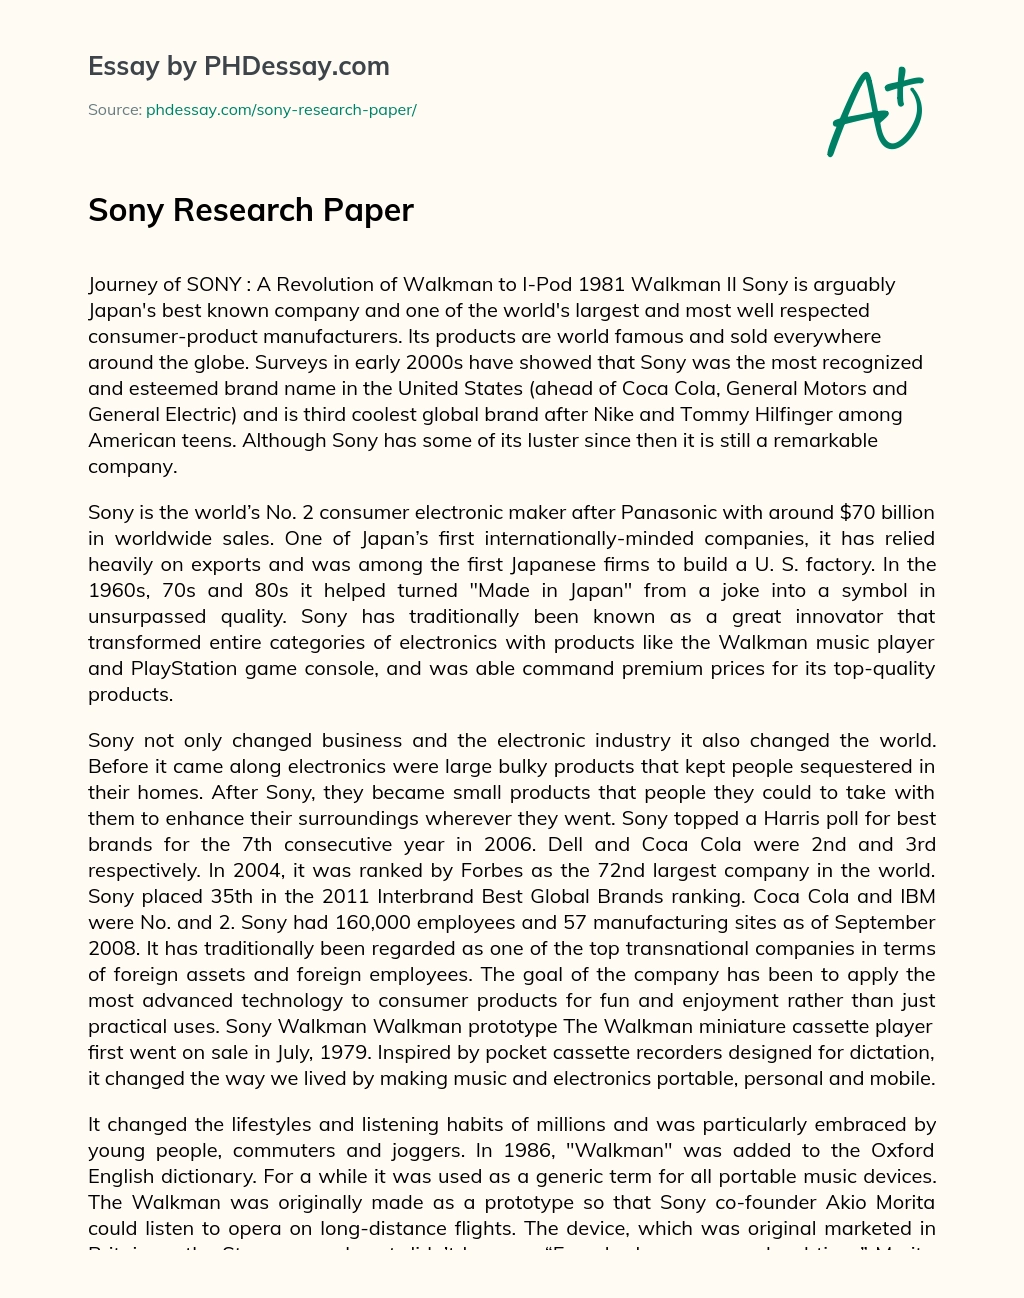 Sony Research Paper essay